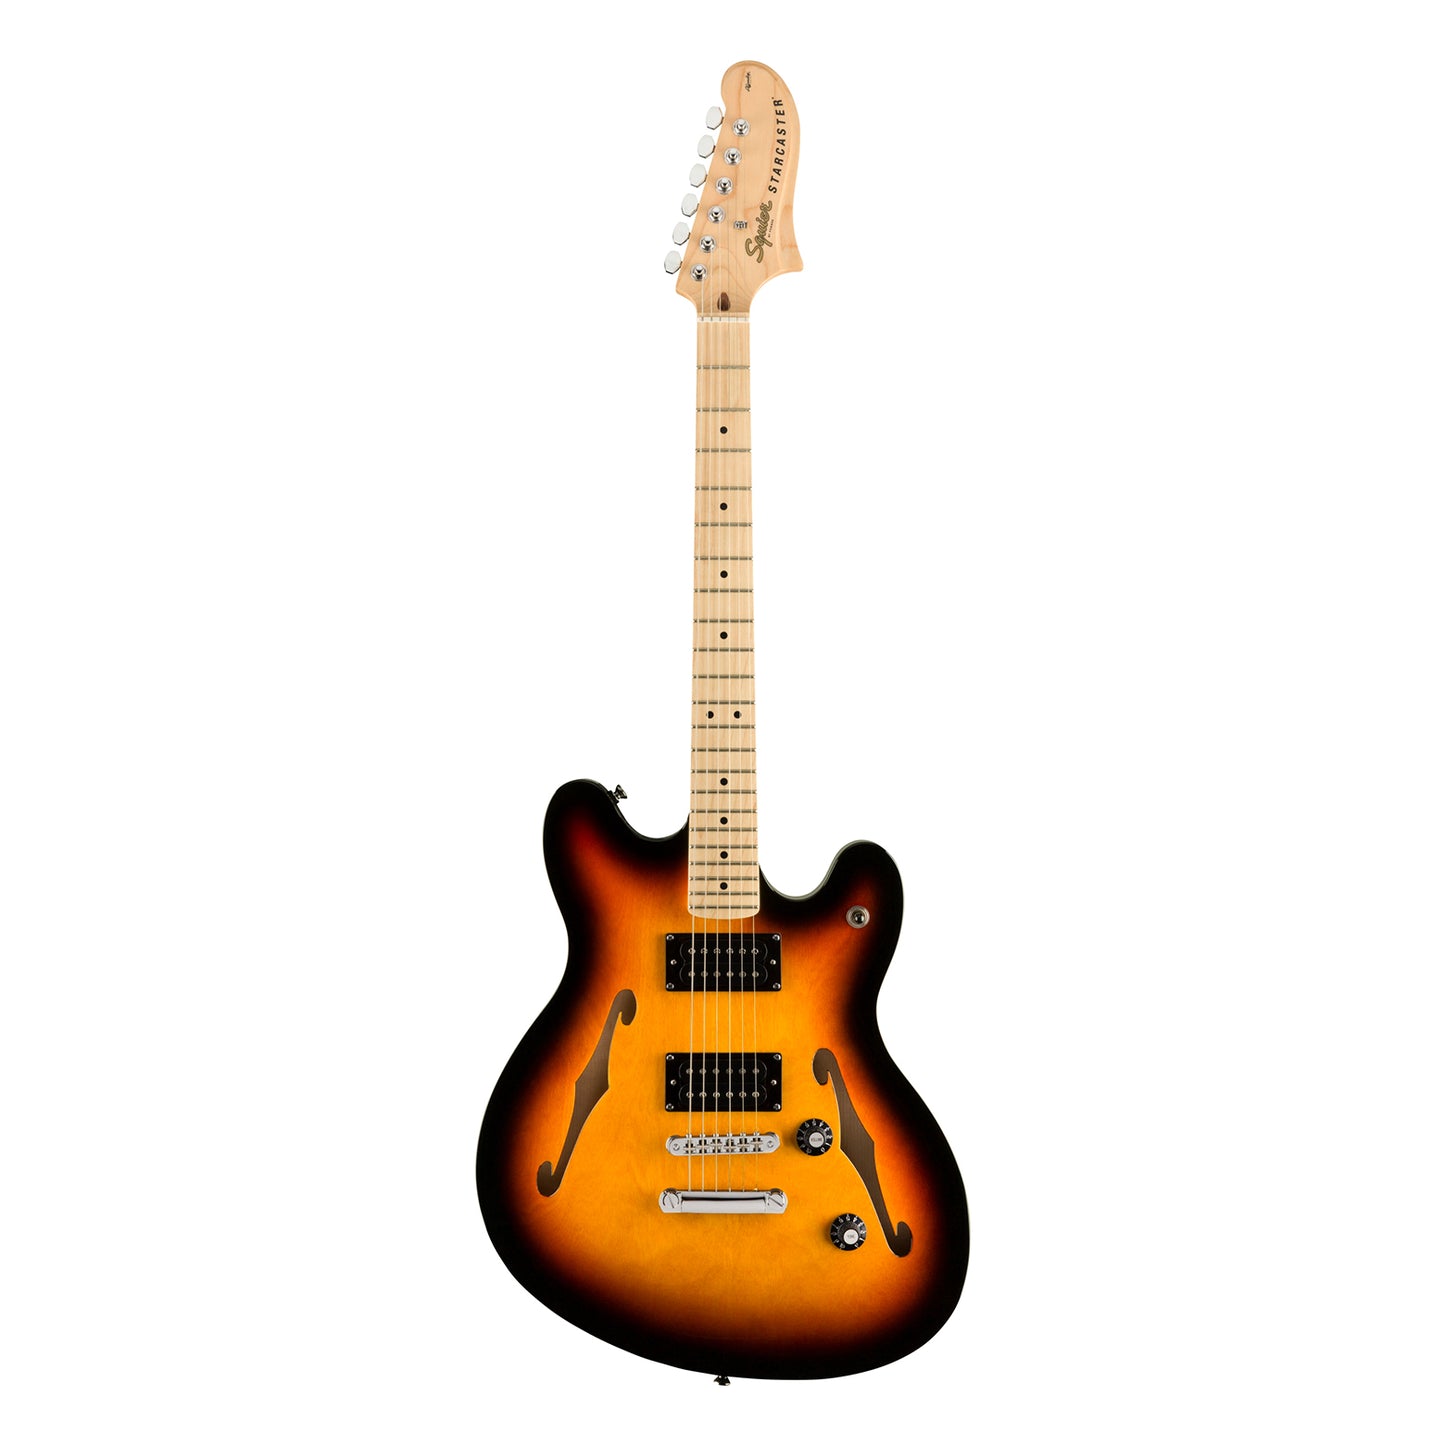 Squier by Fender Affinity Starcaster Electric Guitar with HH Pickup, Semi Hollow Body, Maple Fingerboard (Sunburst, White, Black)